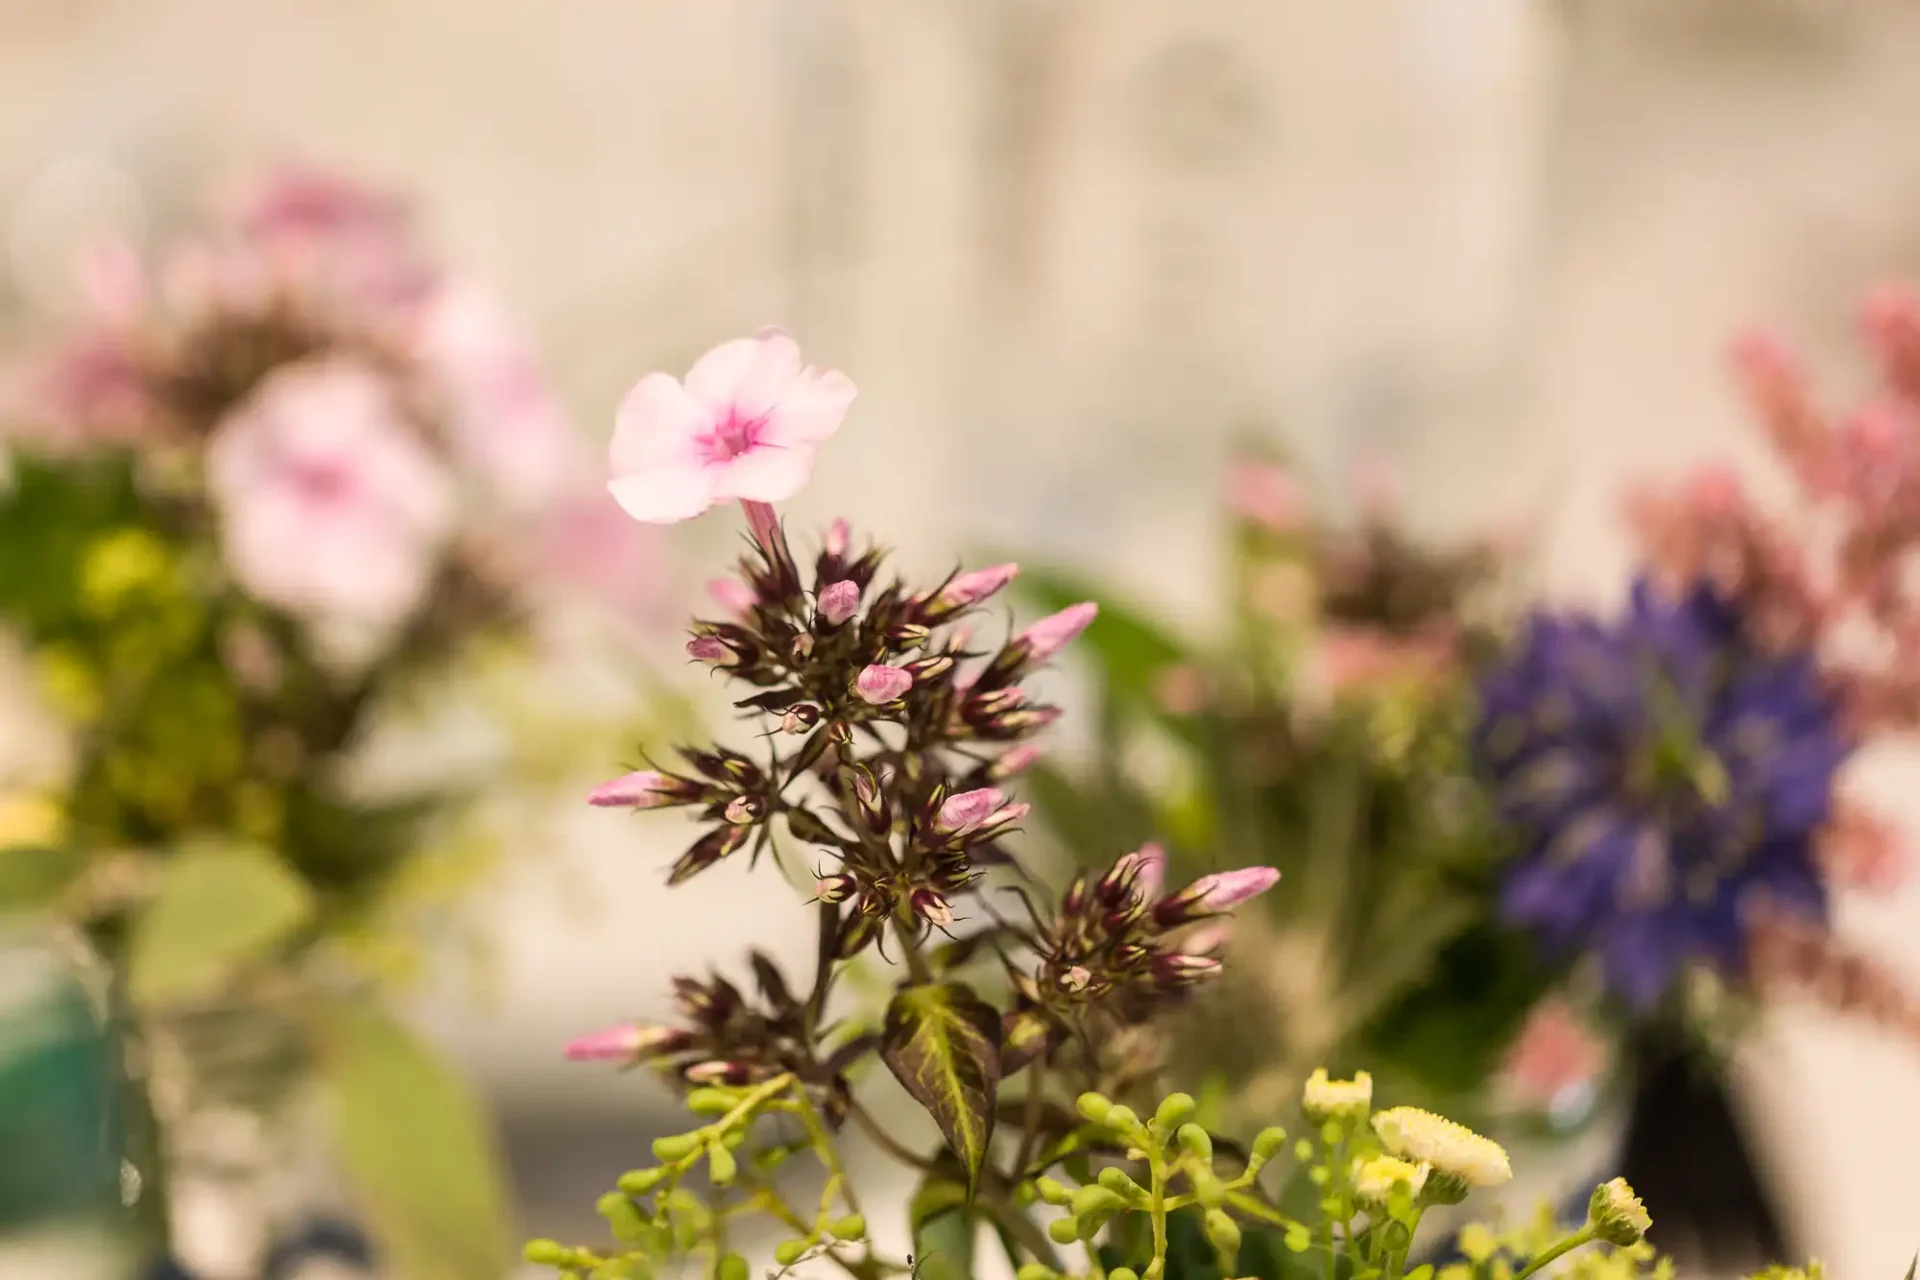 Close-up of delicate pink flowers in focus, with blurred background of various colorful flowers in a floral arrangement.